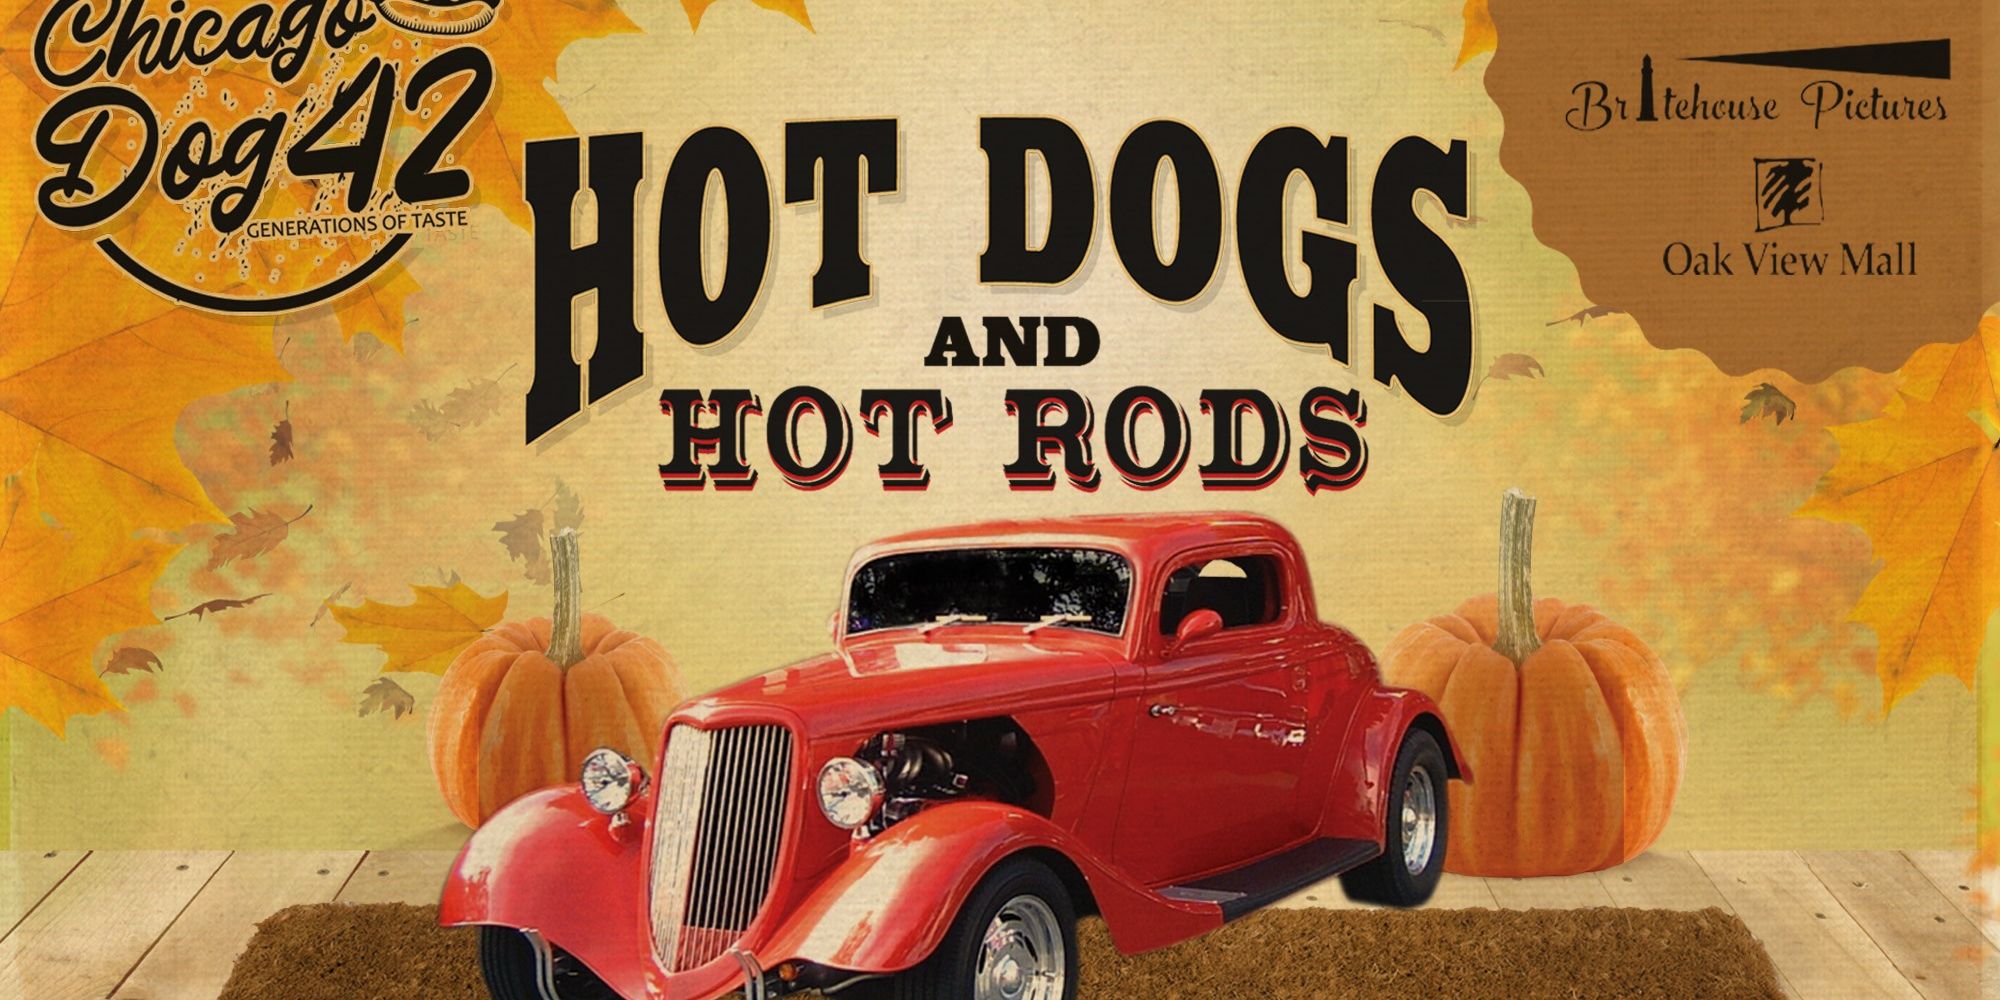 Hot Dogs & Hot Rods promotional image